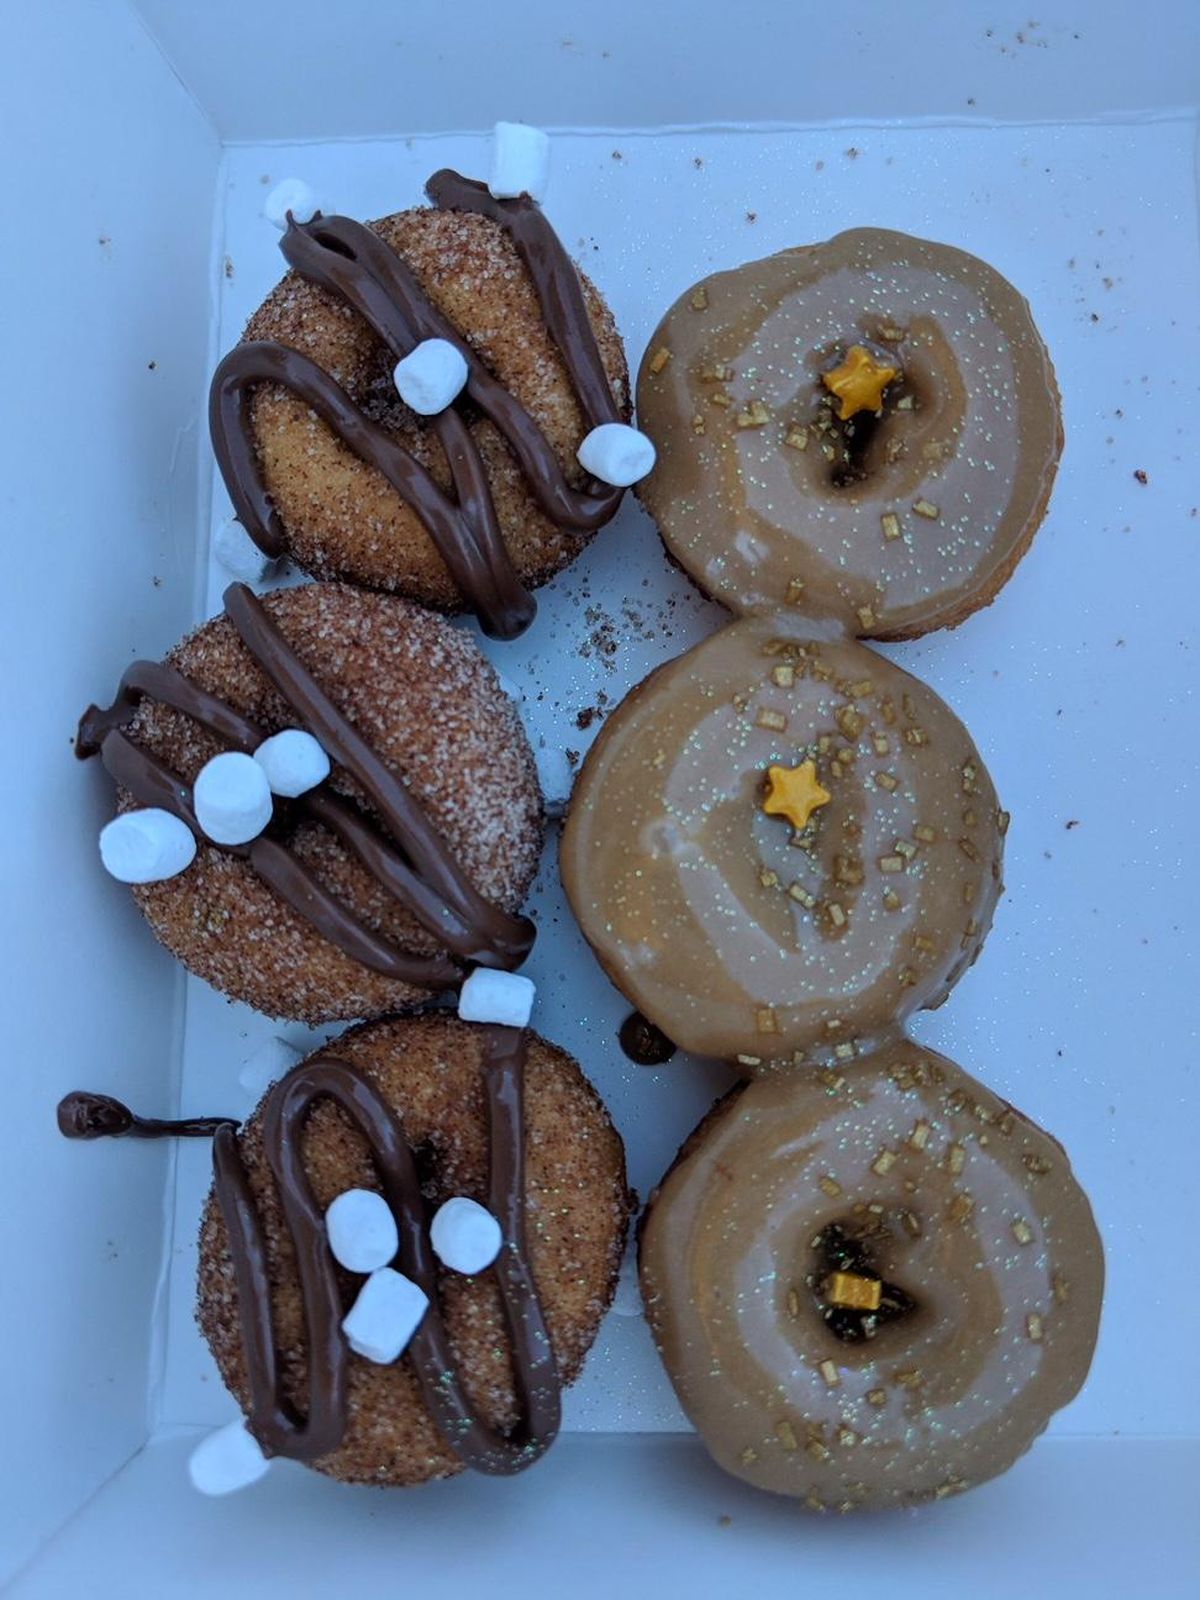 Hello Sugar specializes in mini doughnuts and plans to open a second location in Spokane Valley. The flagship store opened in June and shares space in Kendall Yards with Indaba Coffee Roasters. (Adriana Janovich / The Spokesman-Review)